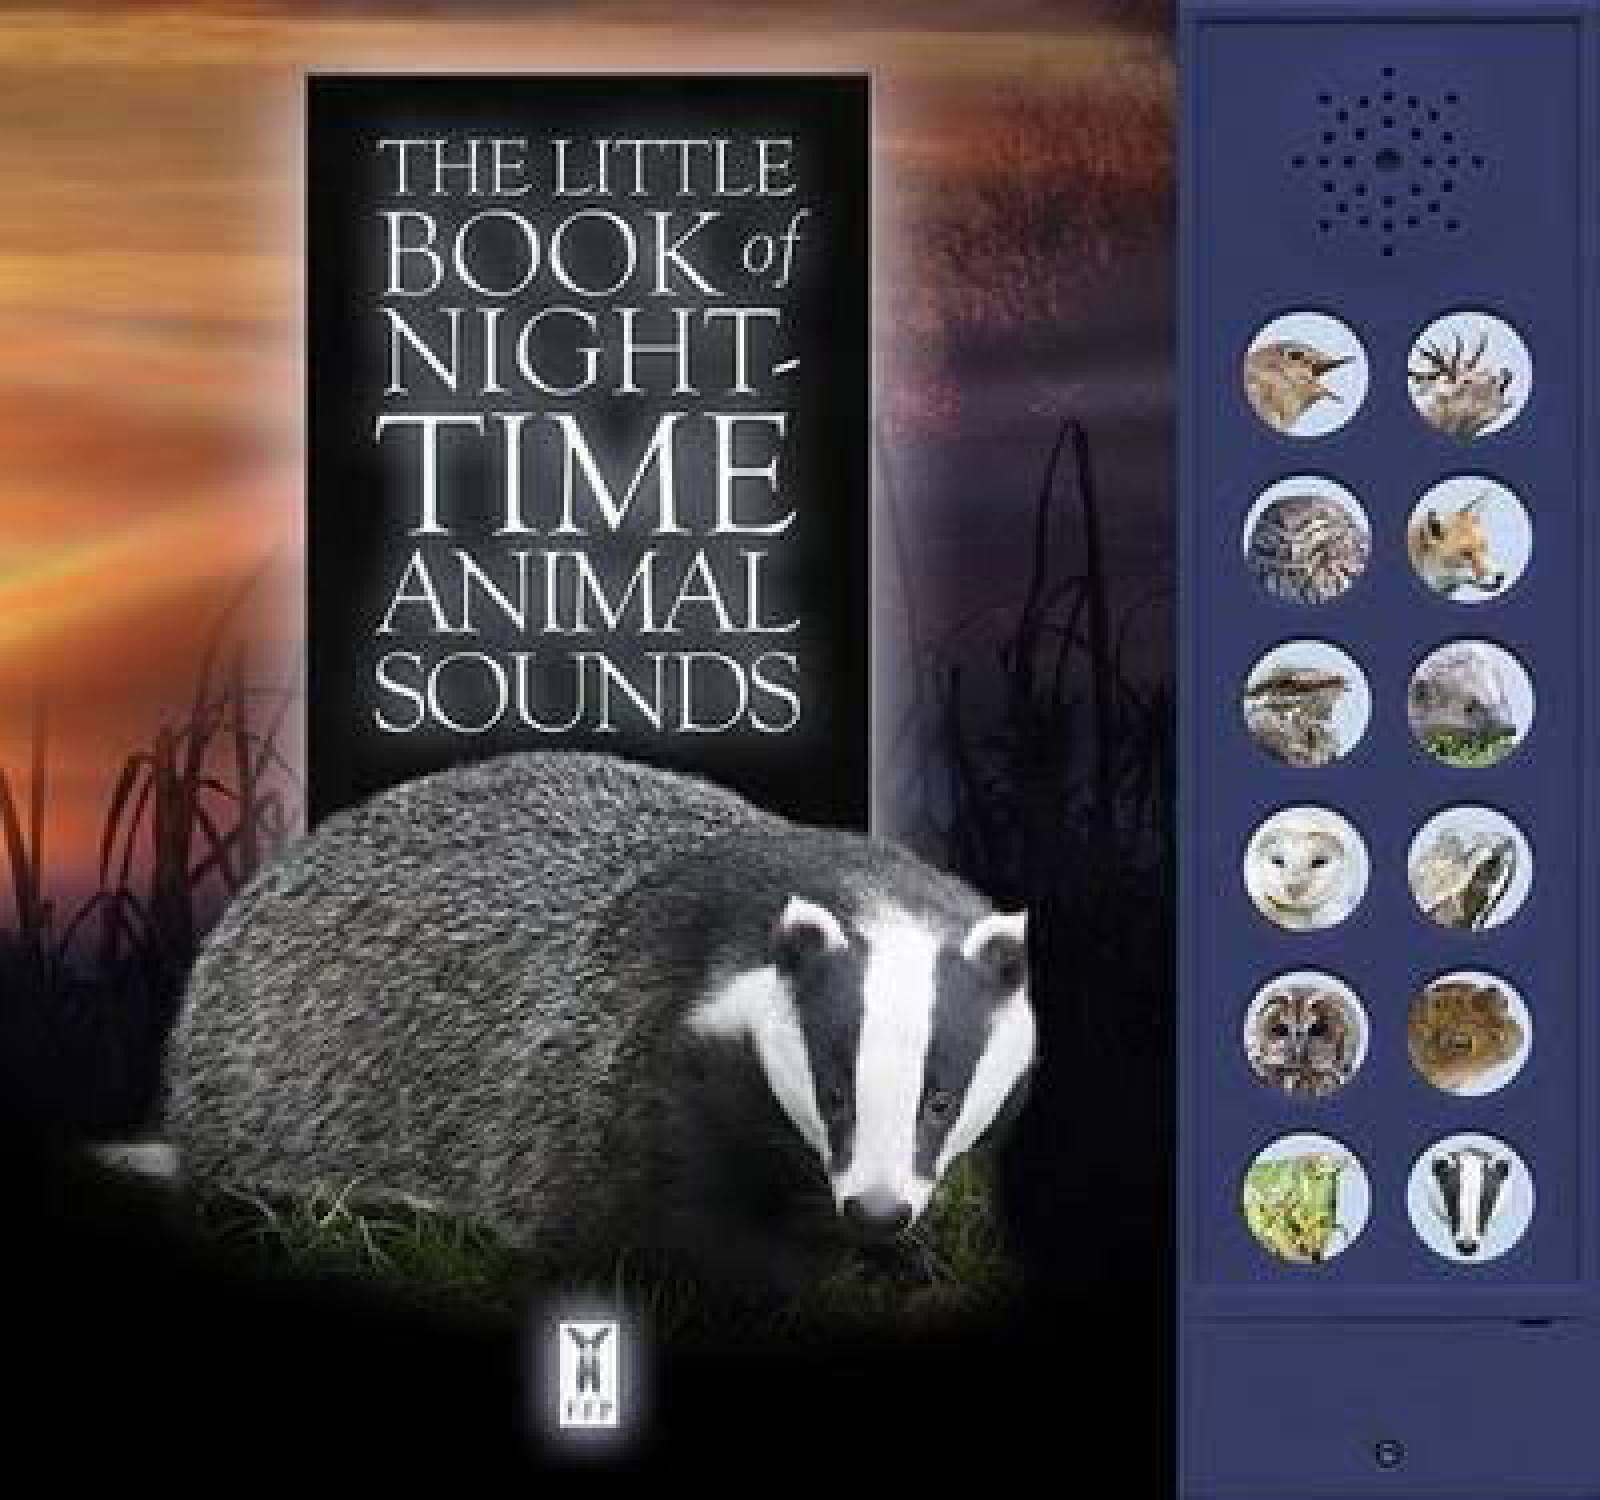 The Little Book Of Night-Time Animal Sounds - Sound Book